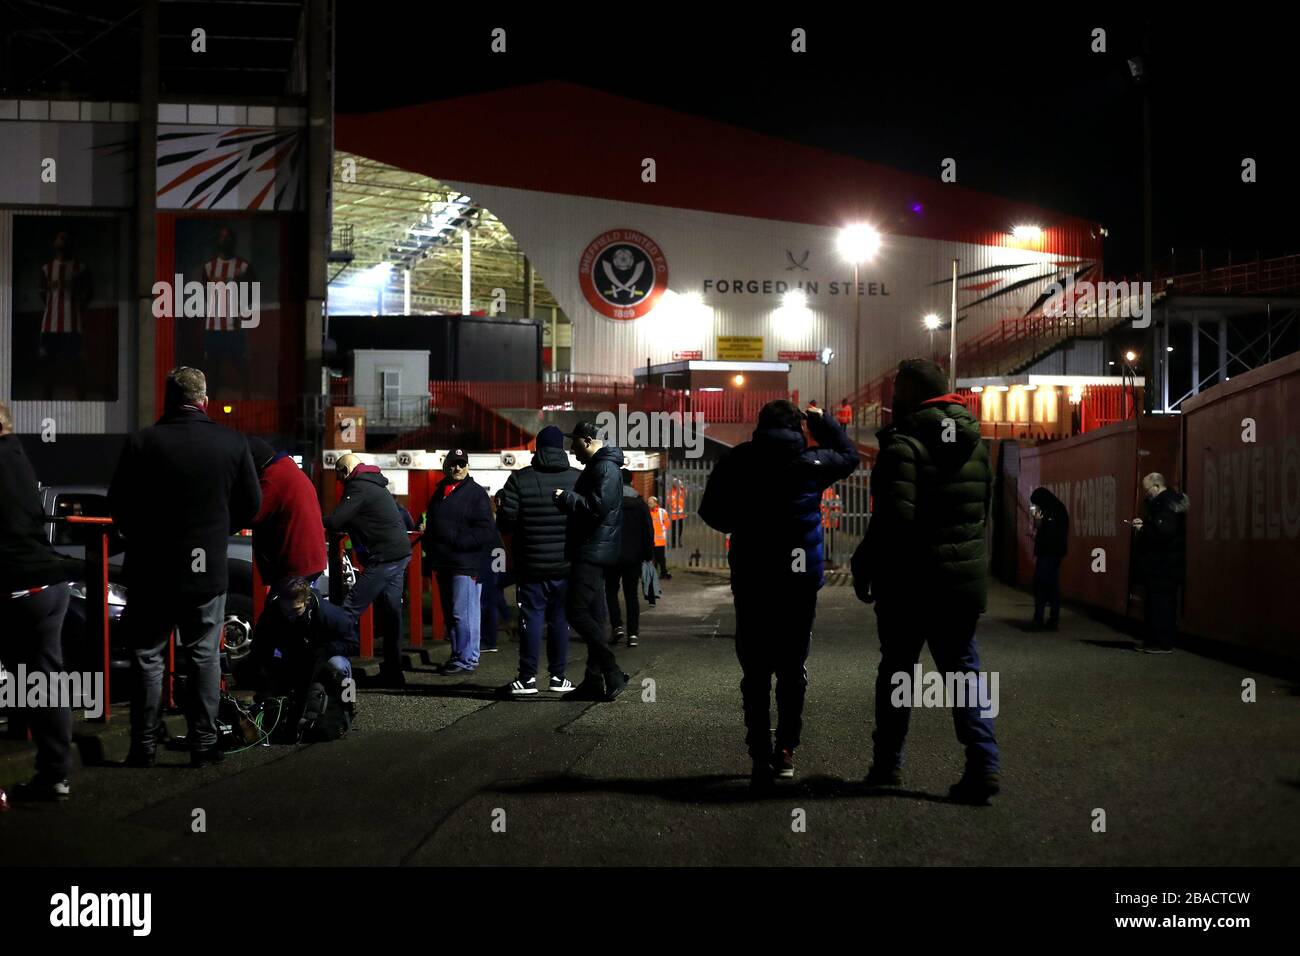 Fans arrive at Bramall Lane ahead of the match Stock Photo